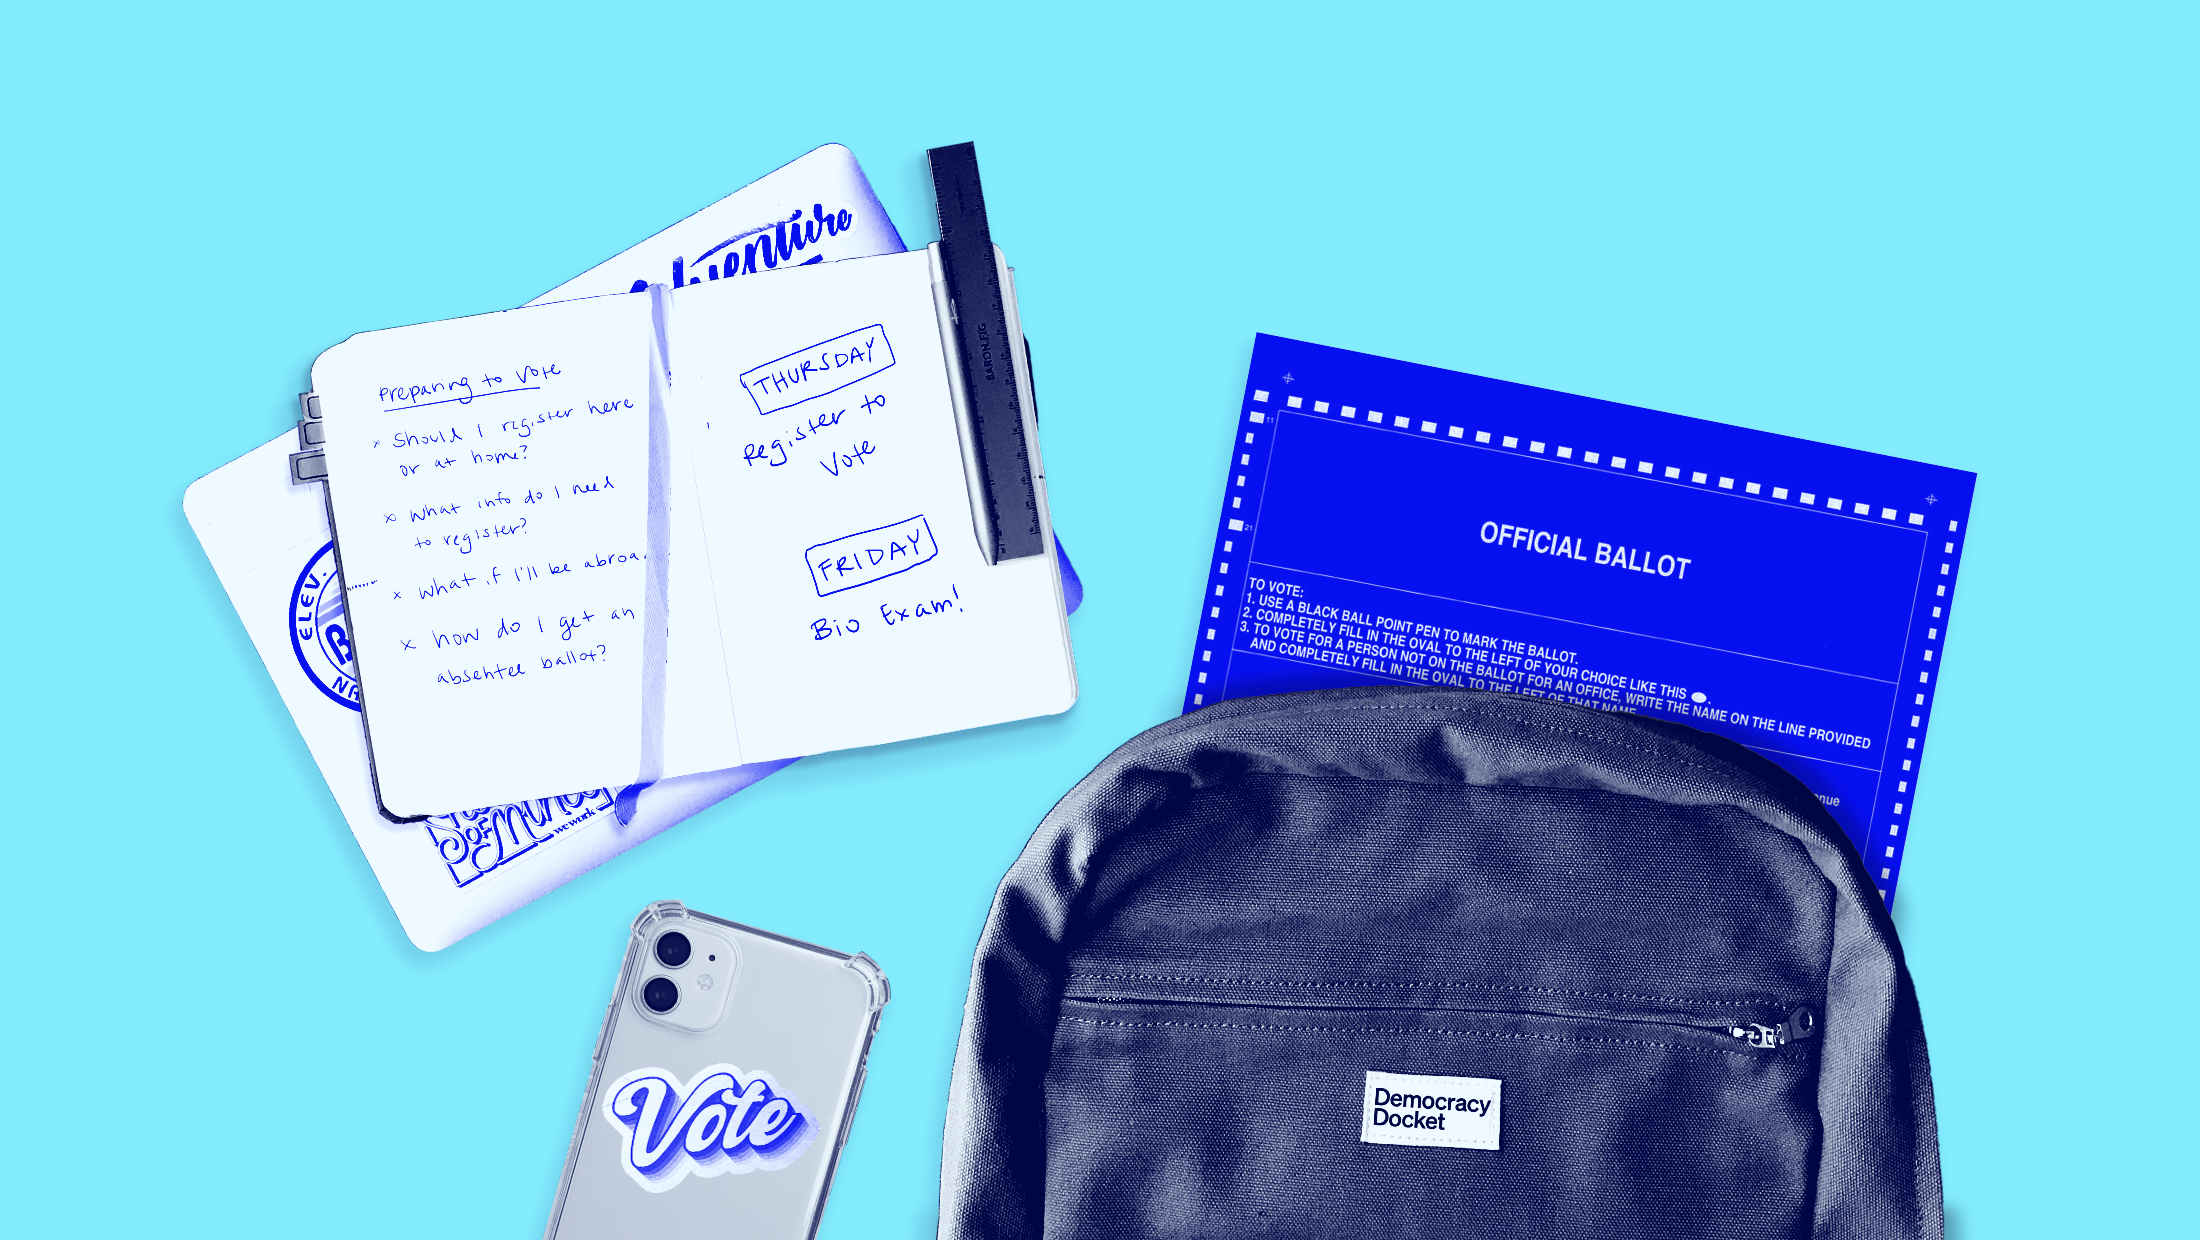 Various voting-themed school supplies including a backpack with a ballot coming out of it, a notebook scribbled with questions about registering to vote, and a cell phone with a sticker that says "VOTE"